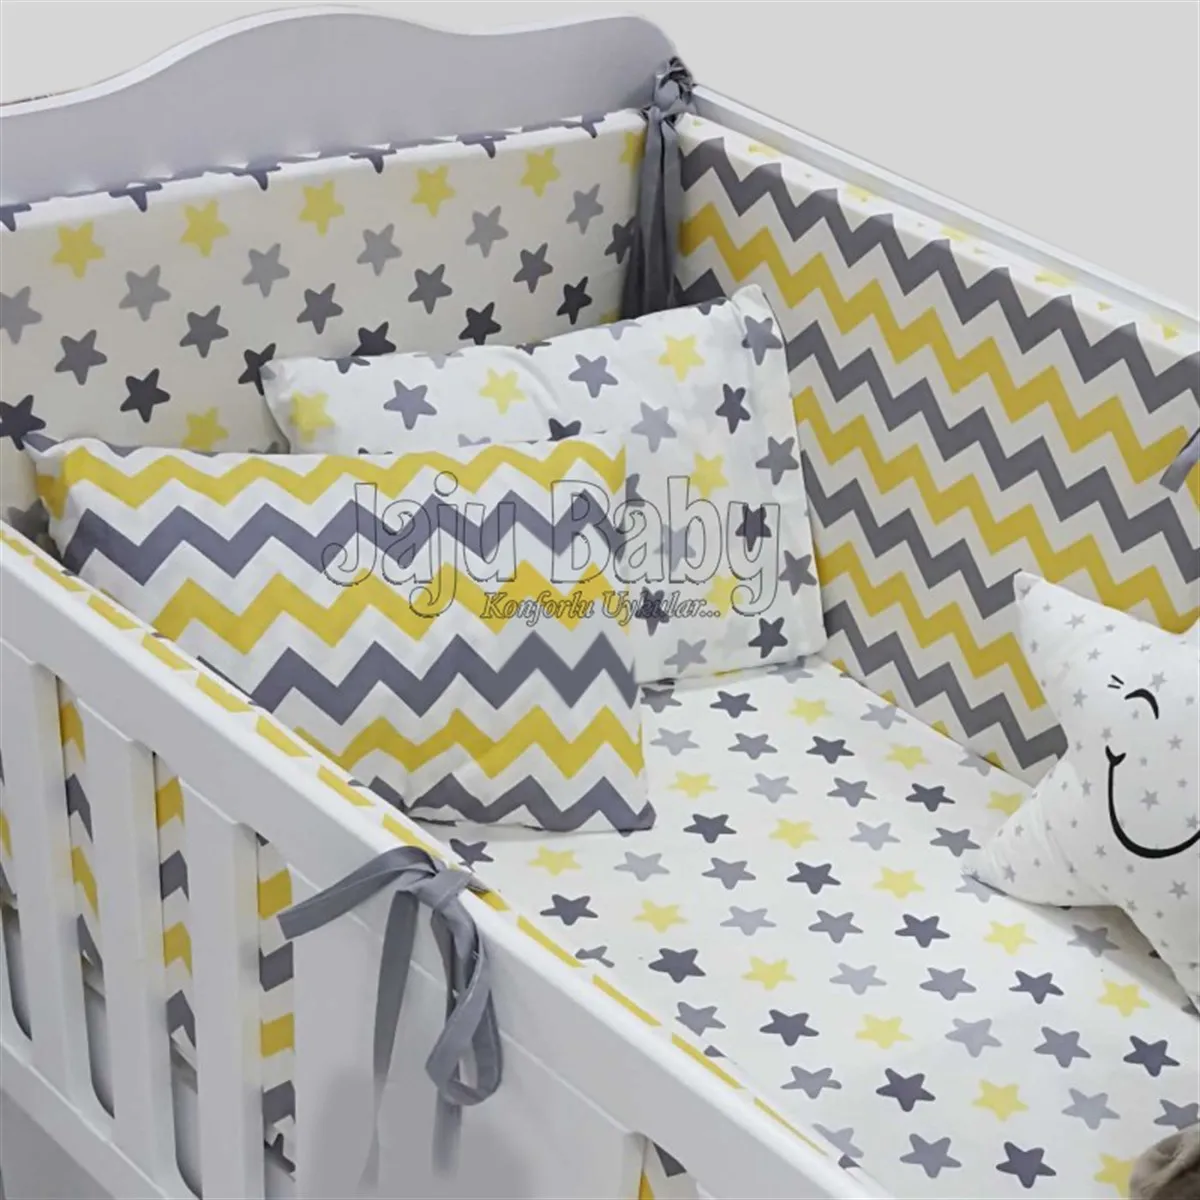 Jaju Baby Handmade, Yellow and Gray Zigzag - Star Baby Duvet Cover Set and Edge Protection, Baby Duvet Cover, Baby sheet